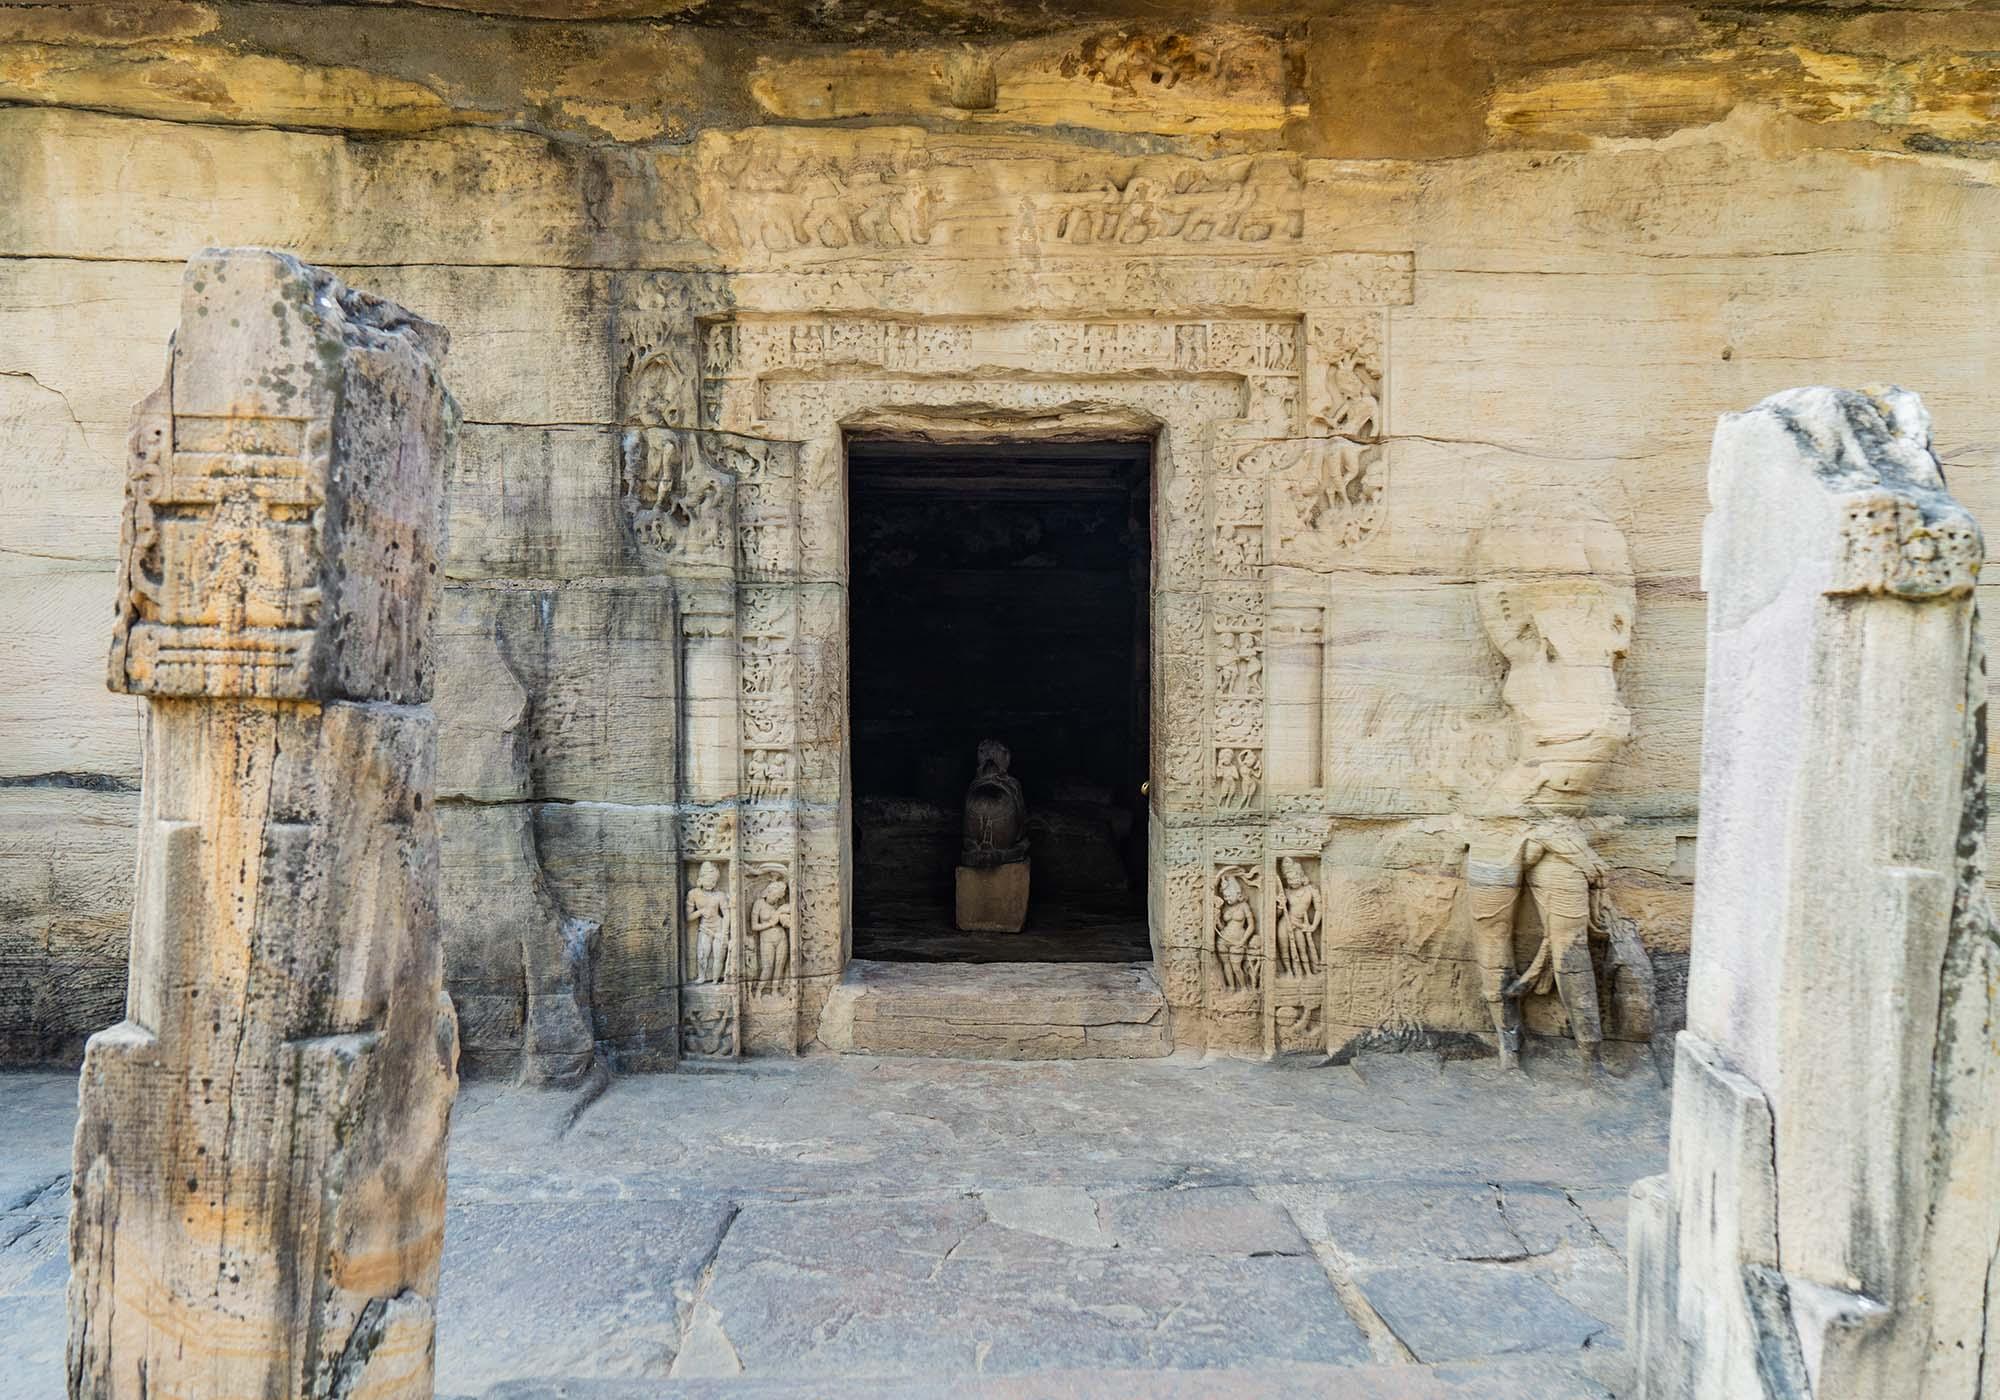 The Udaigiri Caves are just 16 kilometres from Sanchi and have incredible Hindu and Jain rock carvings done between the 4th and 5th centuries AD. – © Michael Turtle